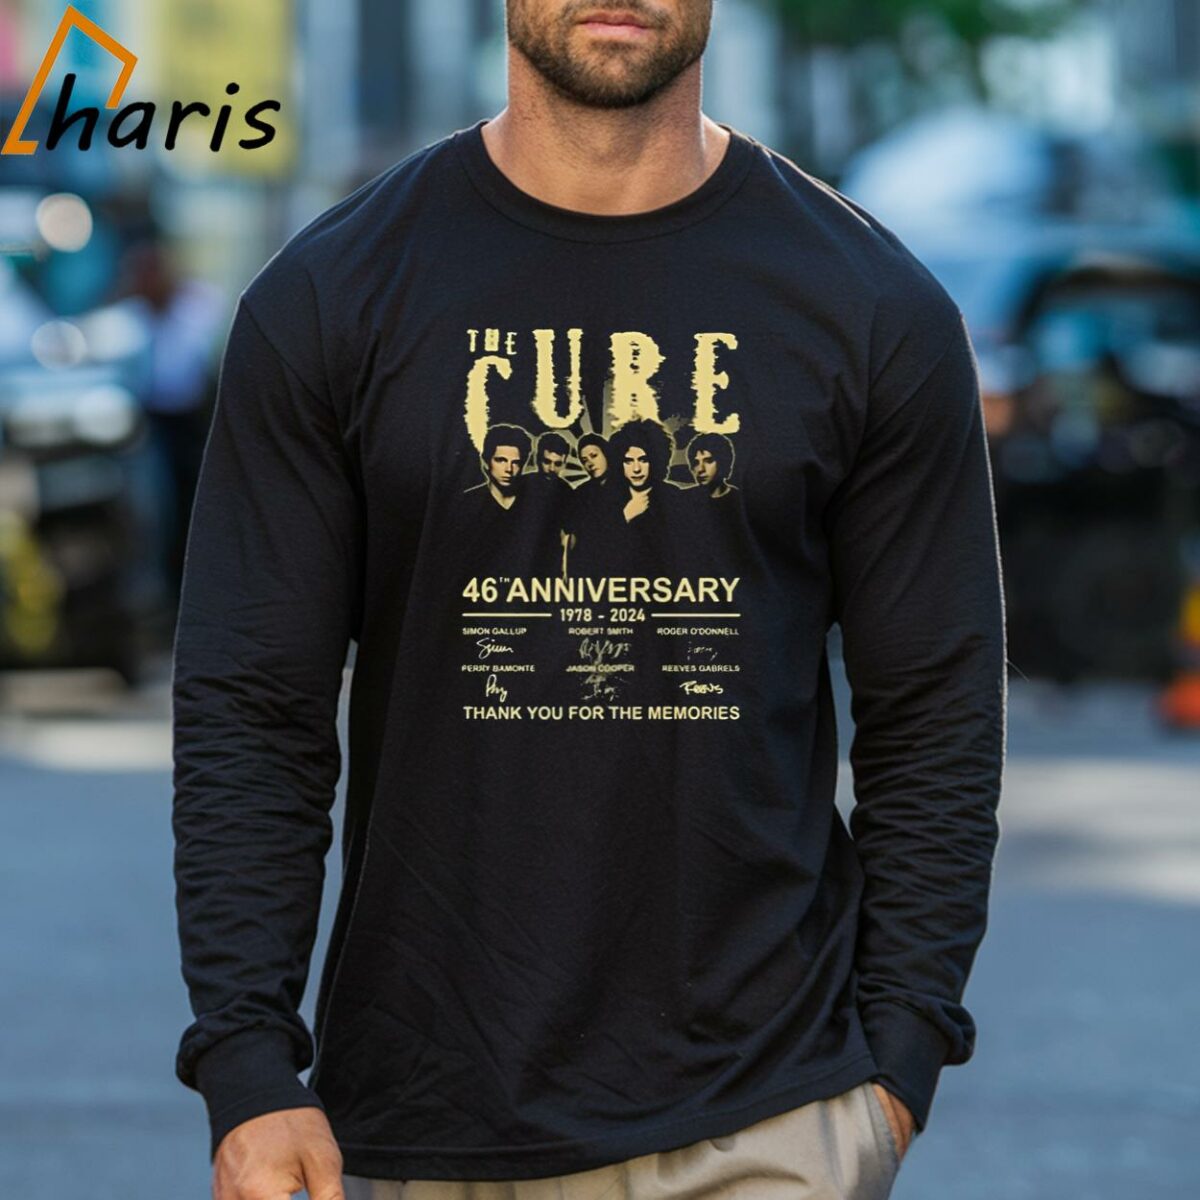 The Cure 46th Anniversary 1978 2024 Thank You For The Memories Signatures T shirt 3 Long sleeve shirt